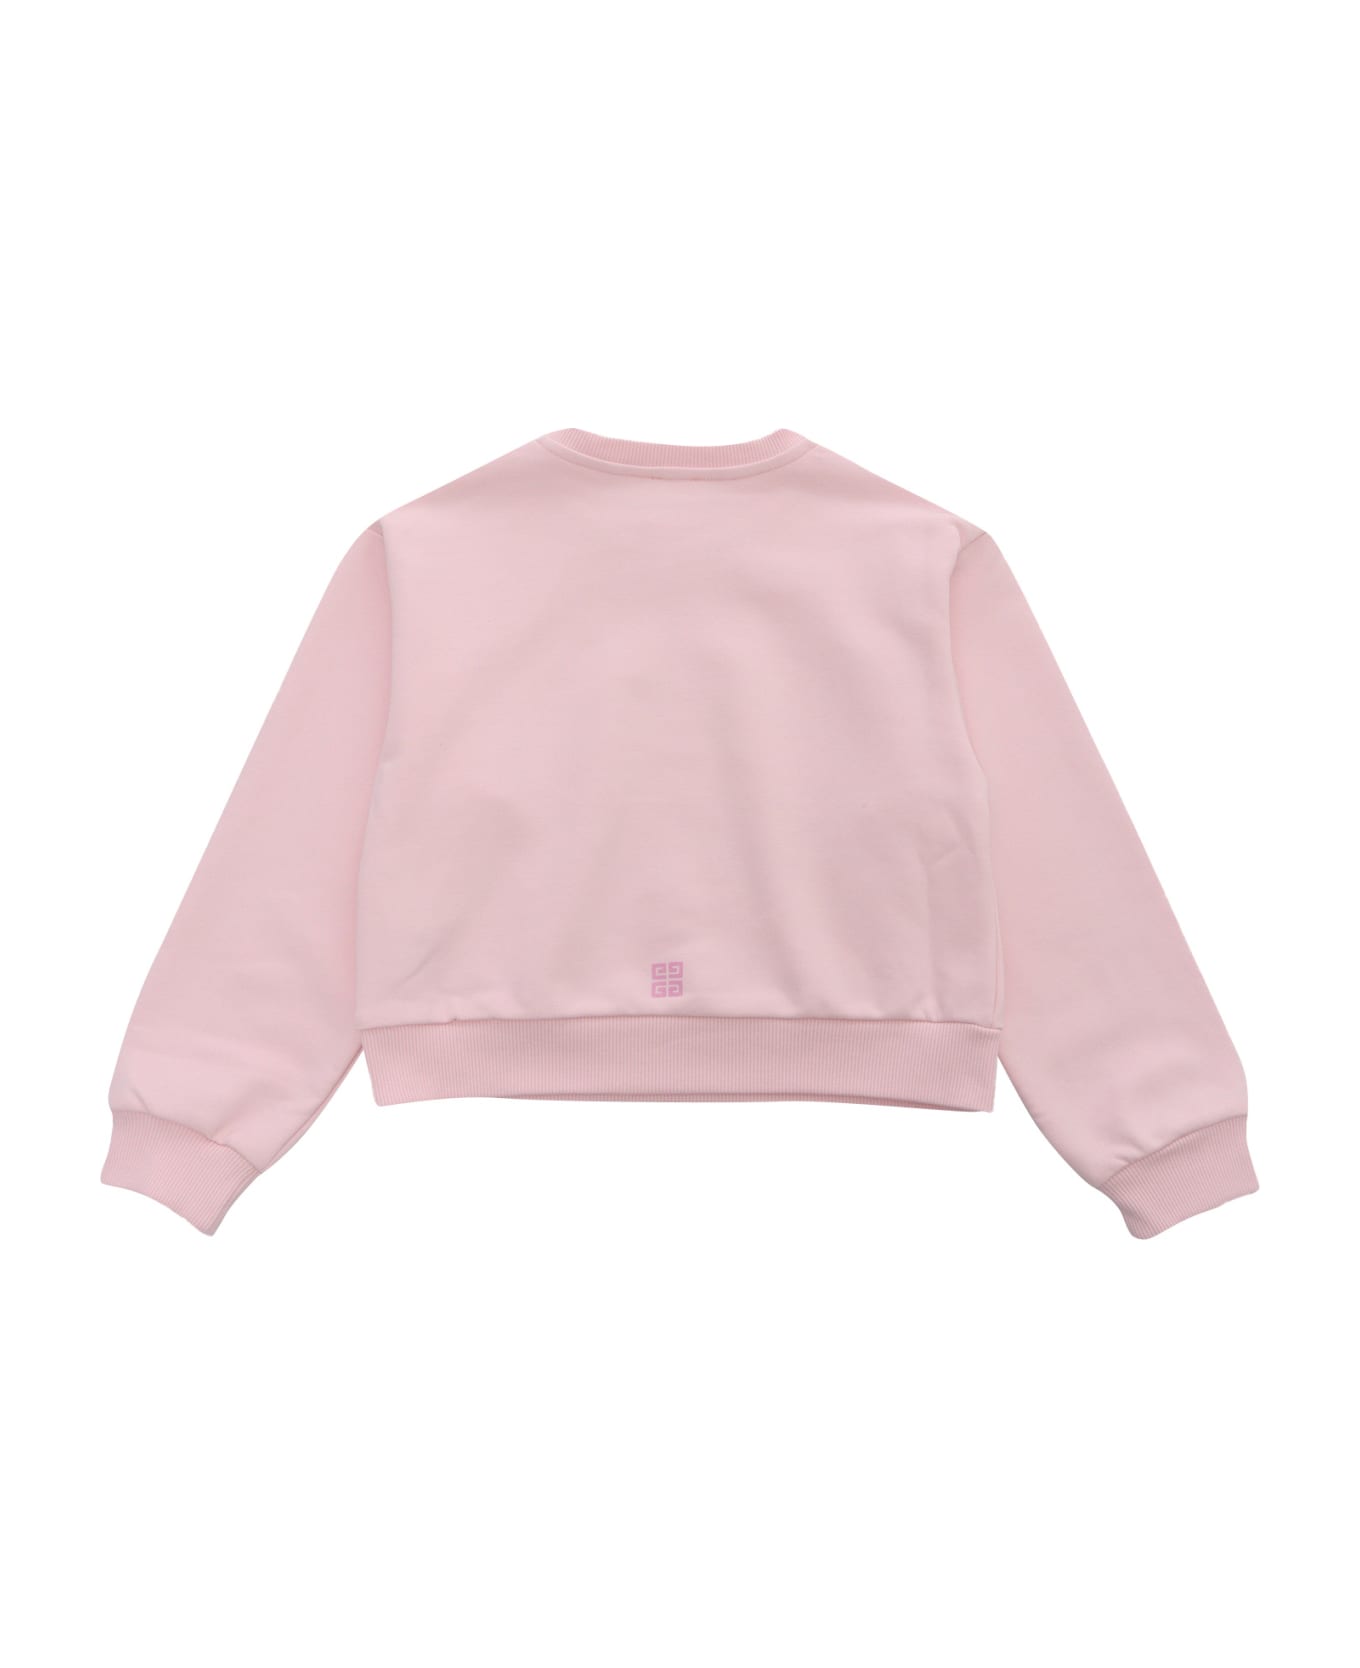 Givenchy Cropped Pink Sweatshirt - PINK